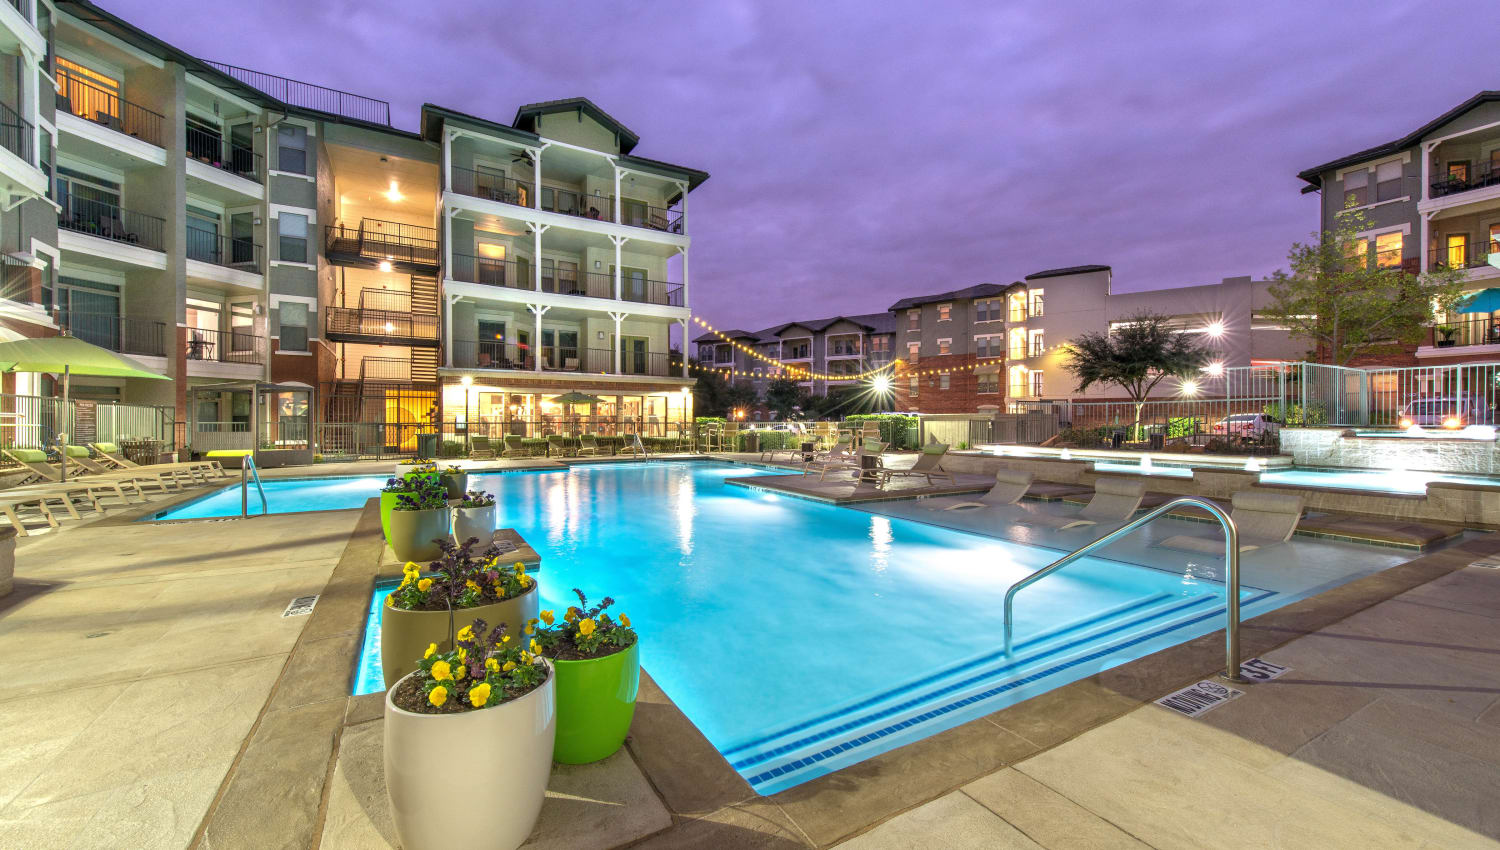 Swimming pool area in the early evening at Olympus Las Colinas in Irving, Texas